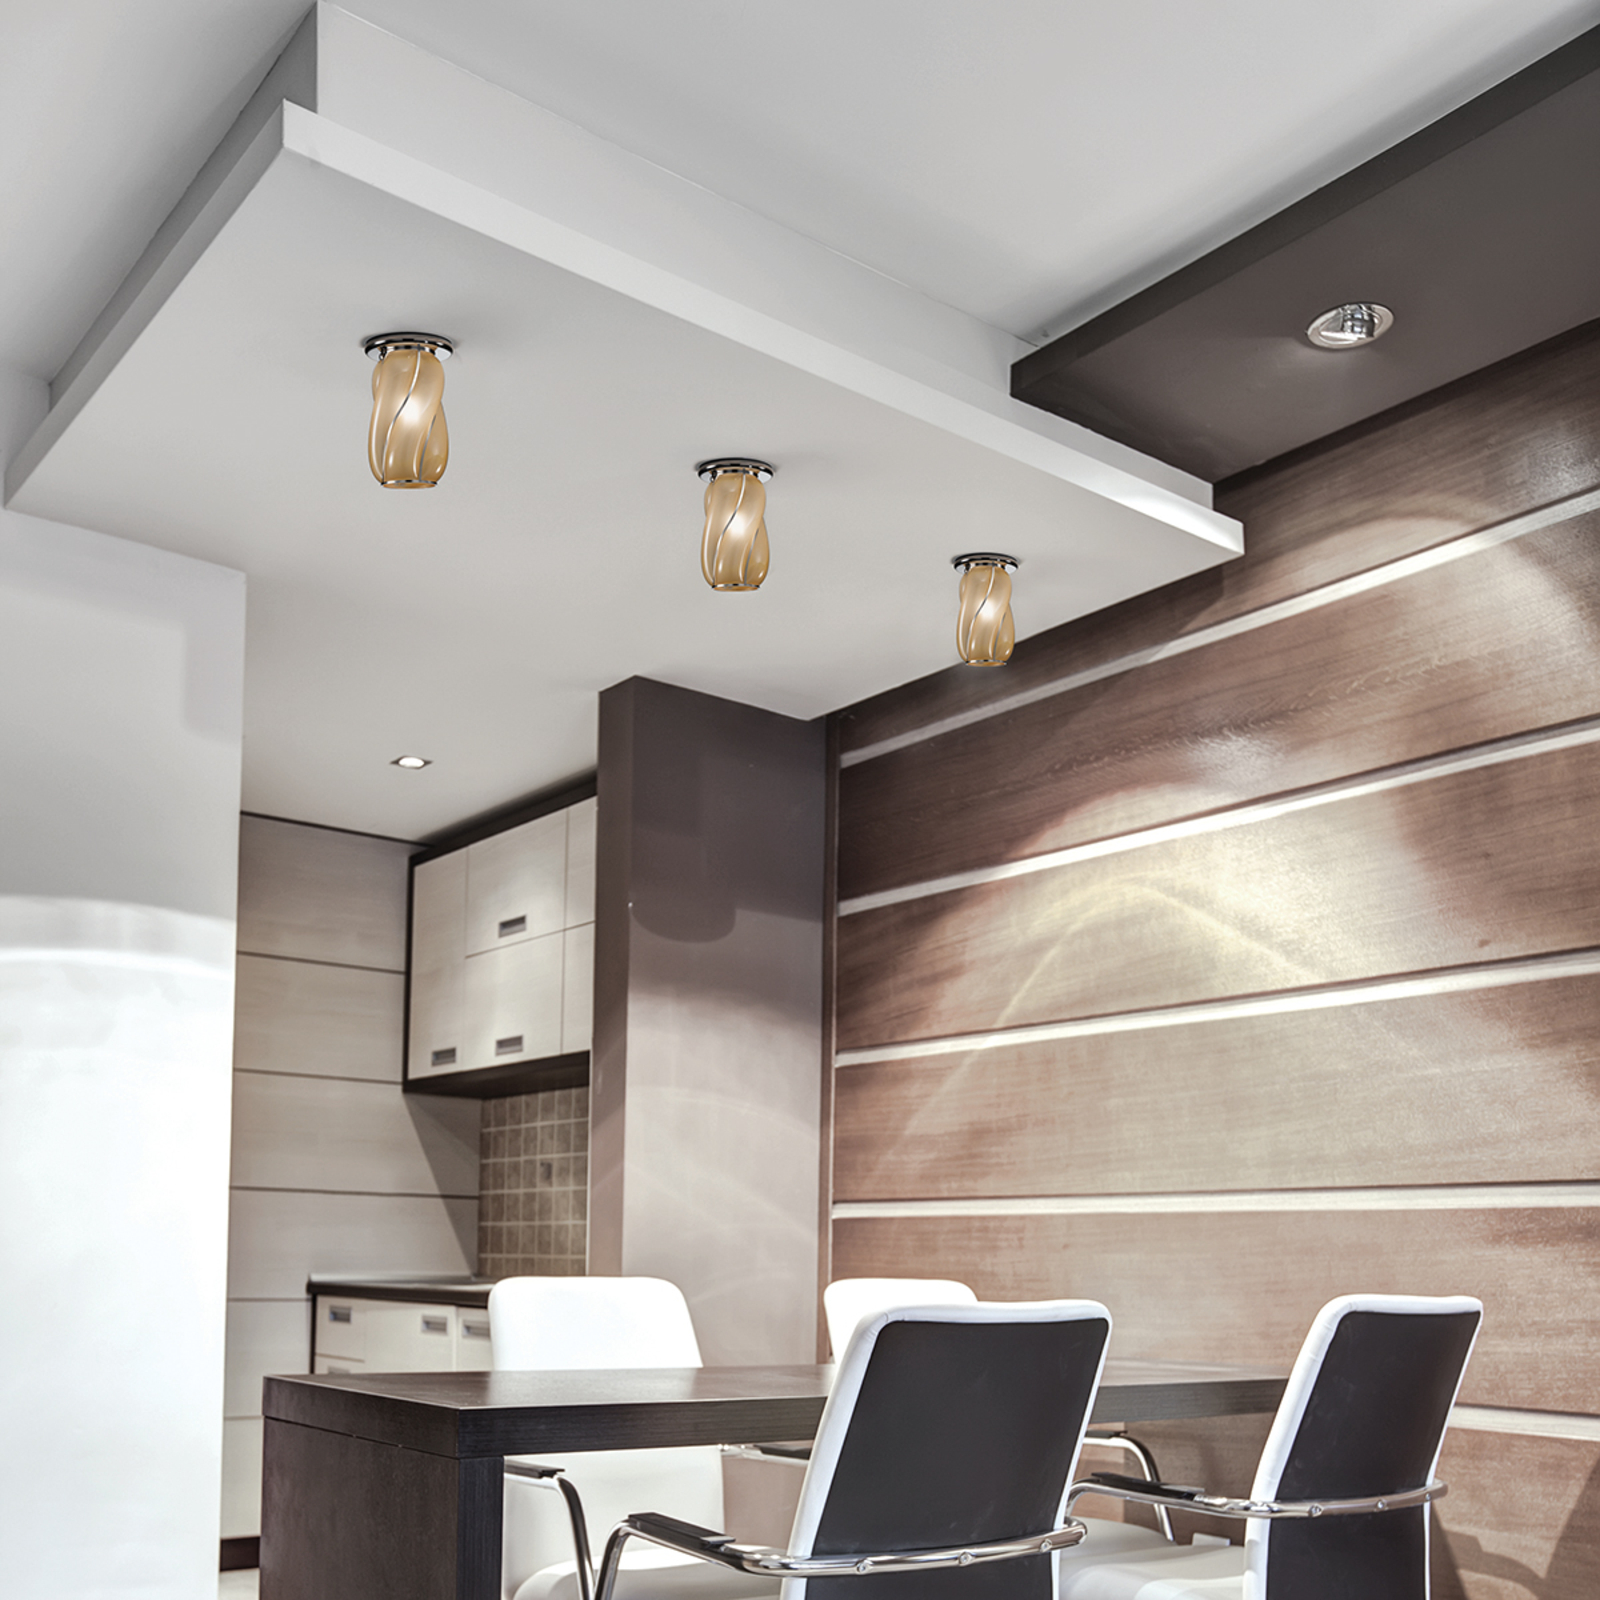 Amber-coloured Orione ceiling light, striped